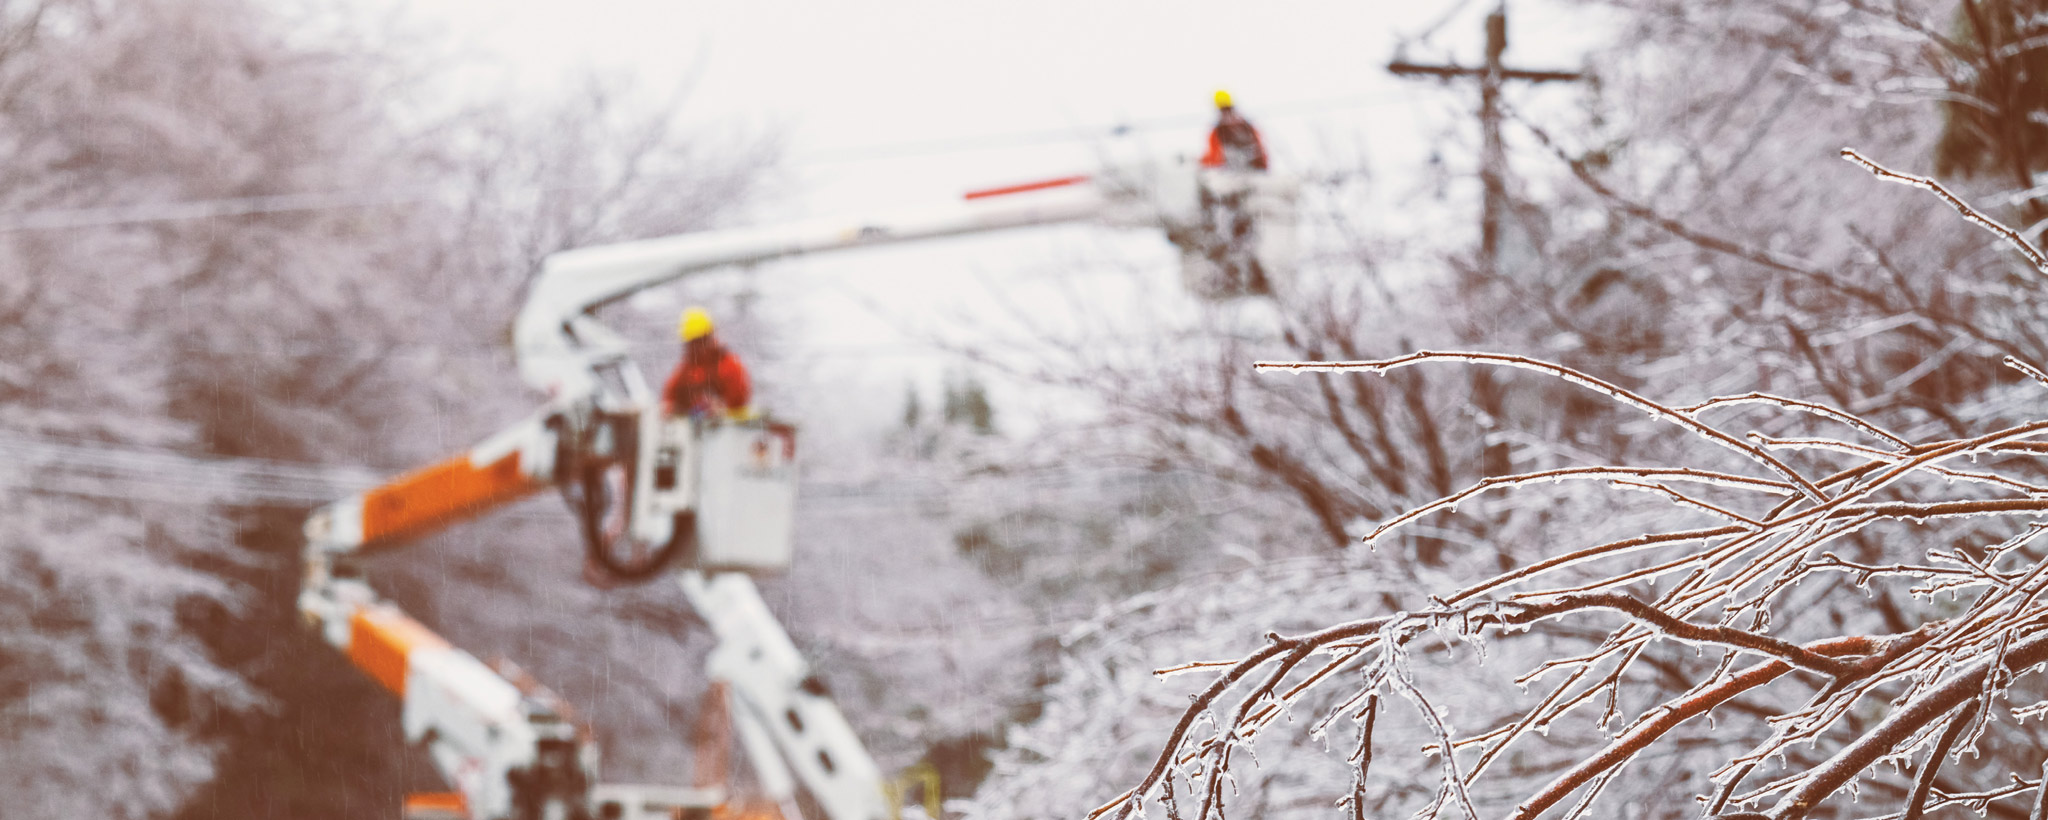 Linesmen working to restore power during an intense ice storm